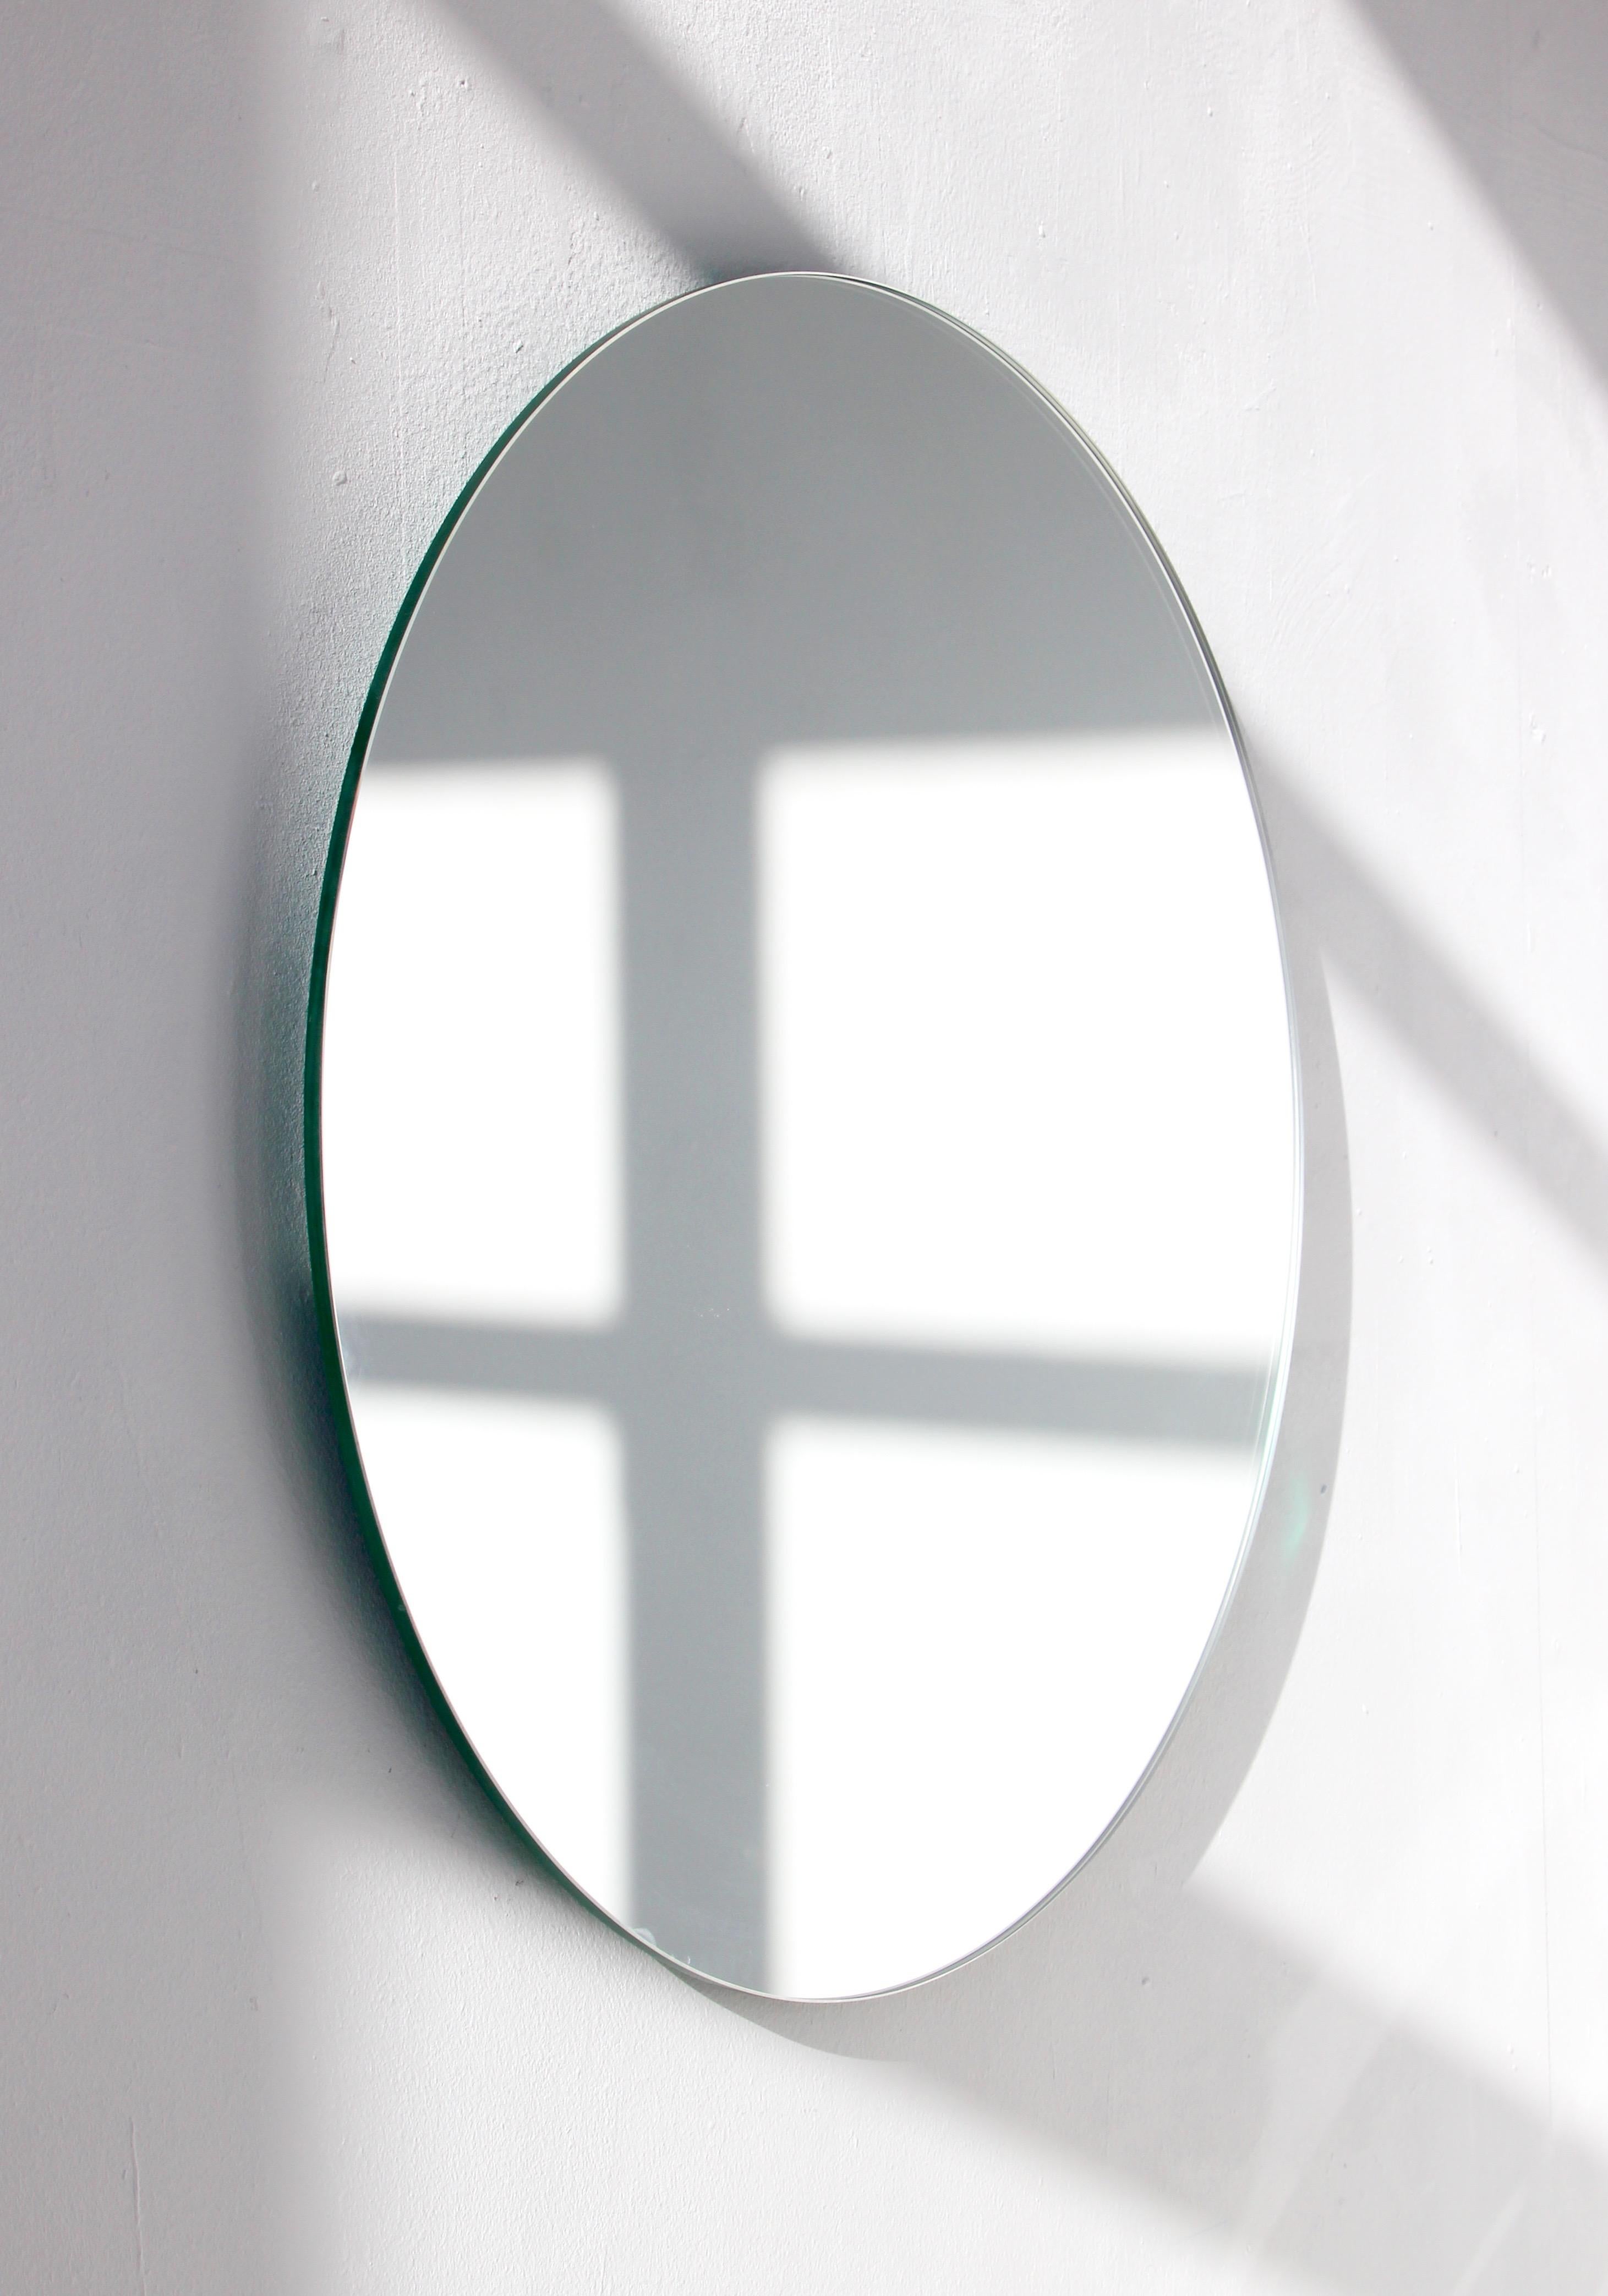 Charming and minimalist round frameless mirror with a floating effect. Quality design that ensures the mirror sits perfectly parallel to the wall. Designed and made in London, UK.

Fitted with professional plates not visible once installed for an